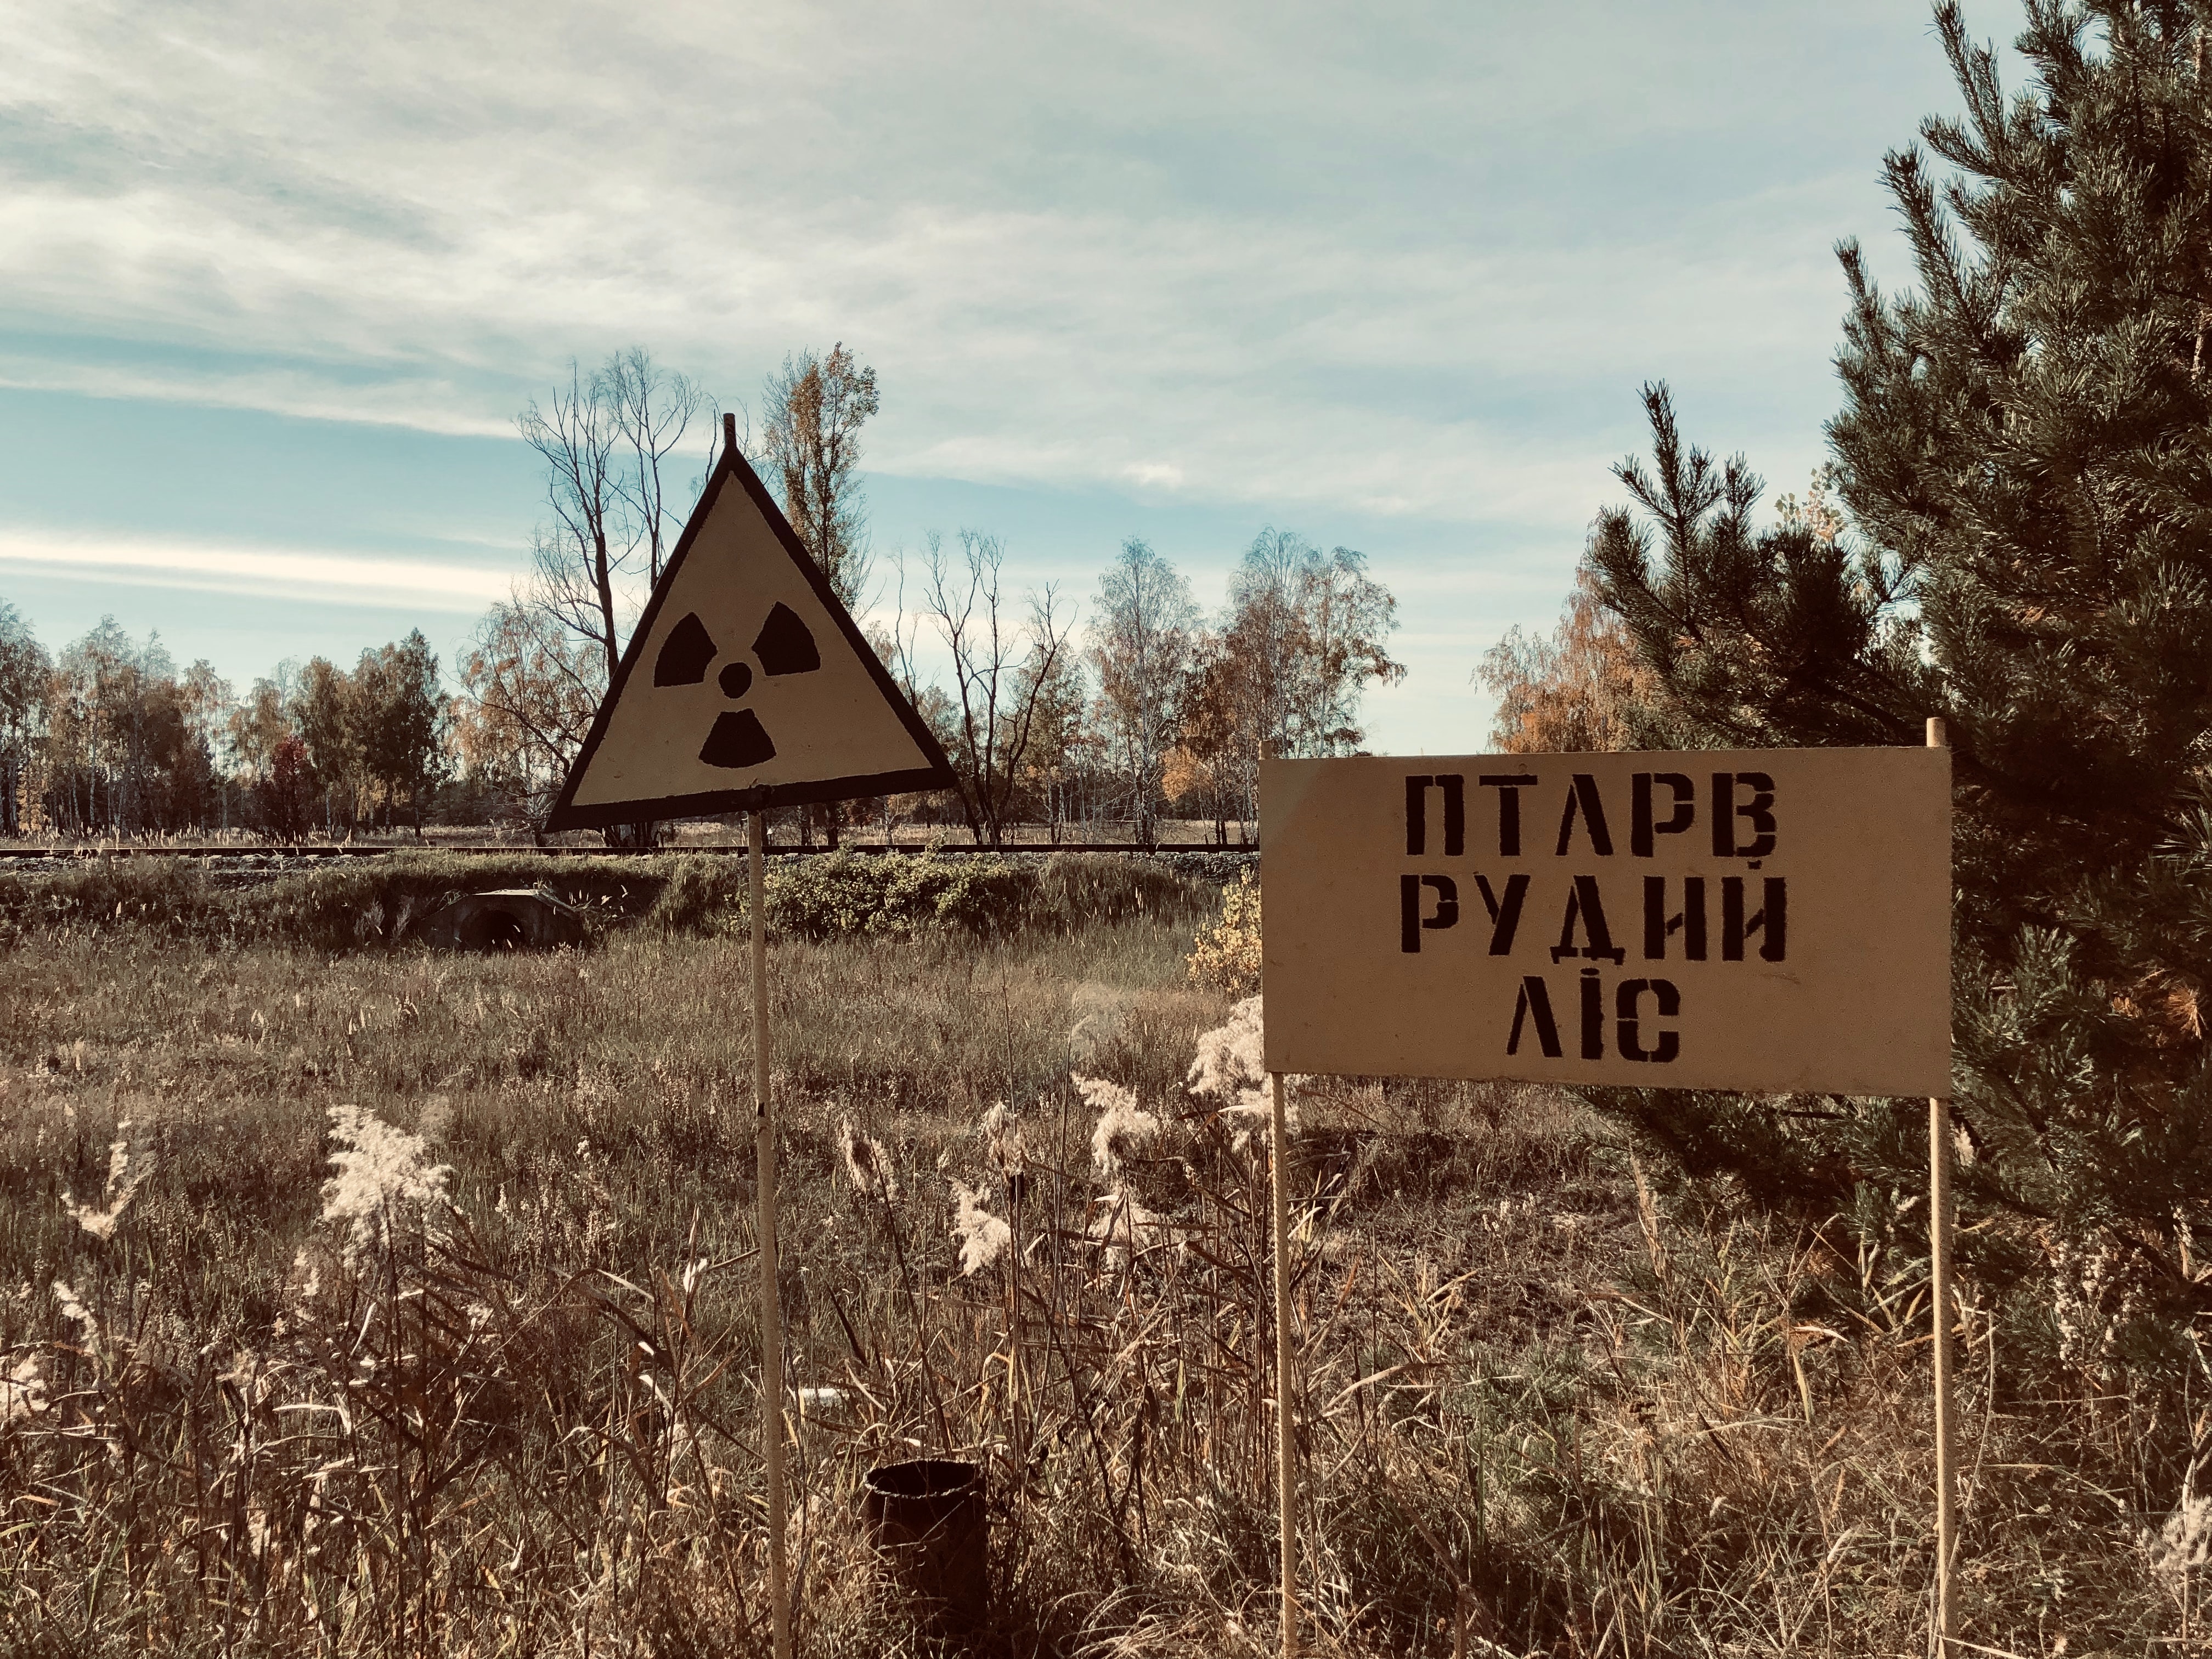 Man-made disasters: The case of Chernobyl and its impact on the local populations